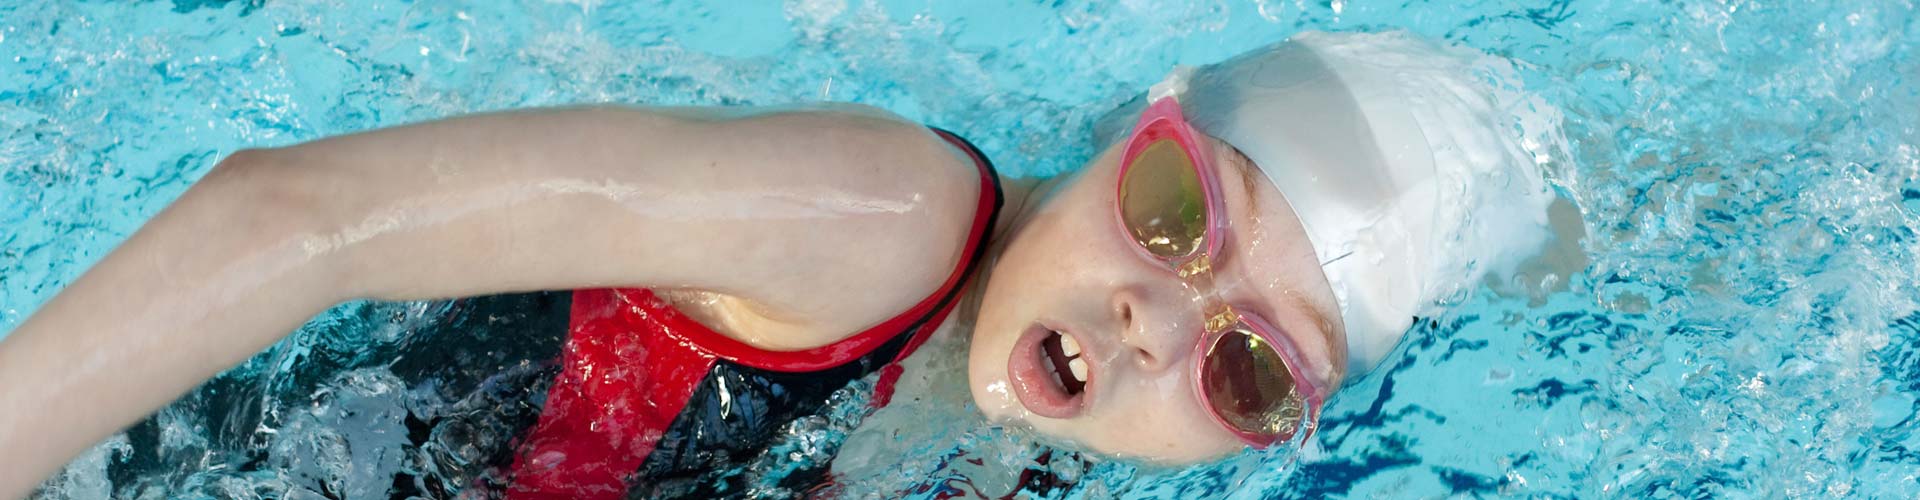 Girl with goggles and cap swimming